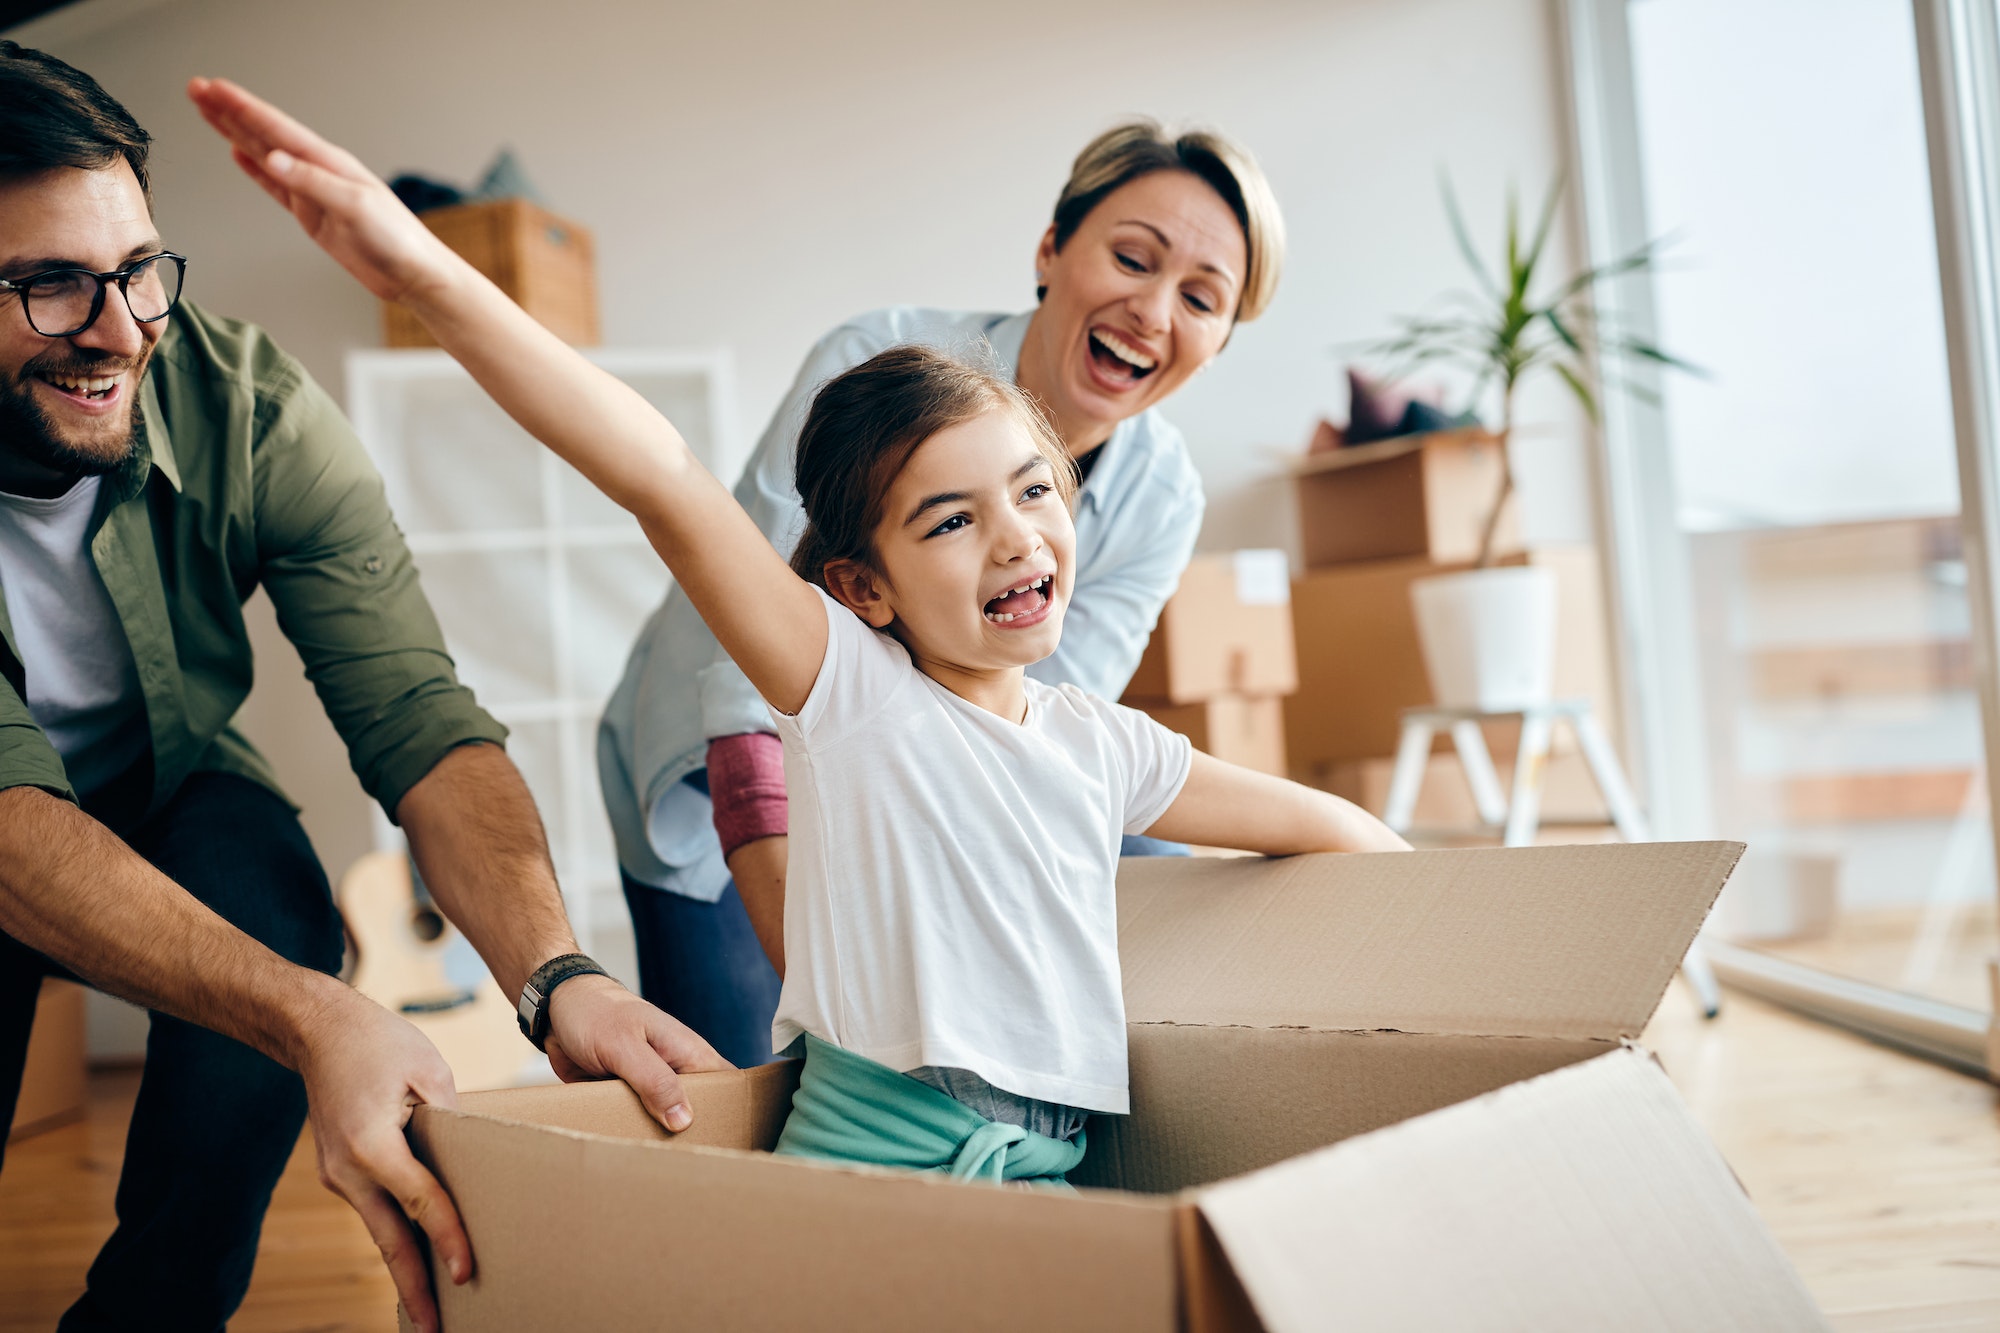 Cheerful family having fun while moving into their new home.